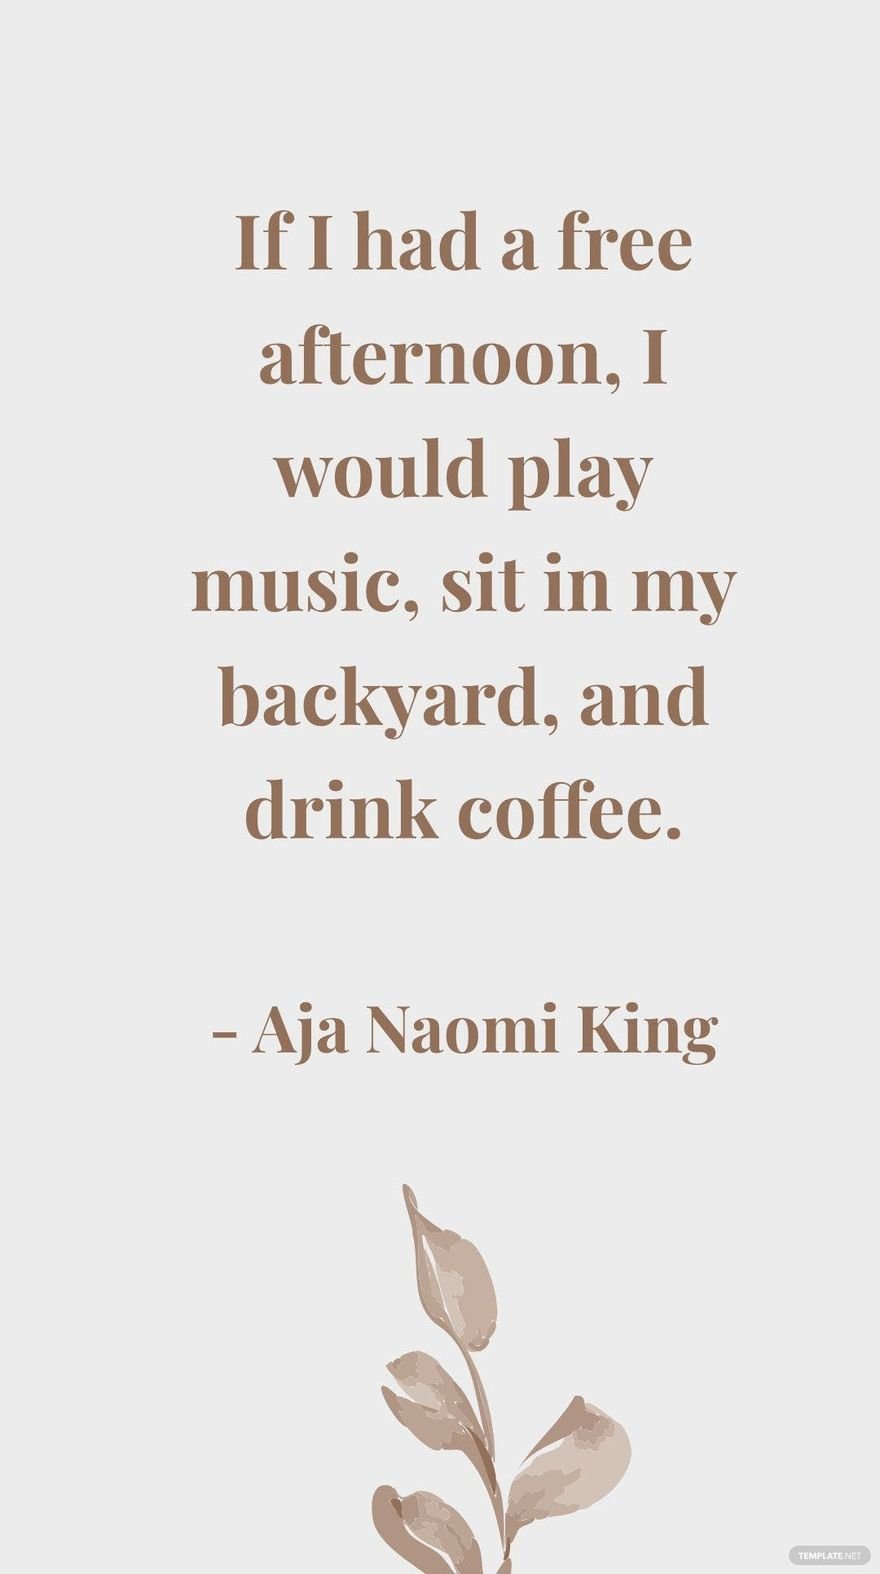 Aja Naomi King - If I had a afternoon, I would play music, sit in my backyard, and drink coffee. in JPG